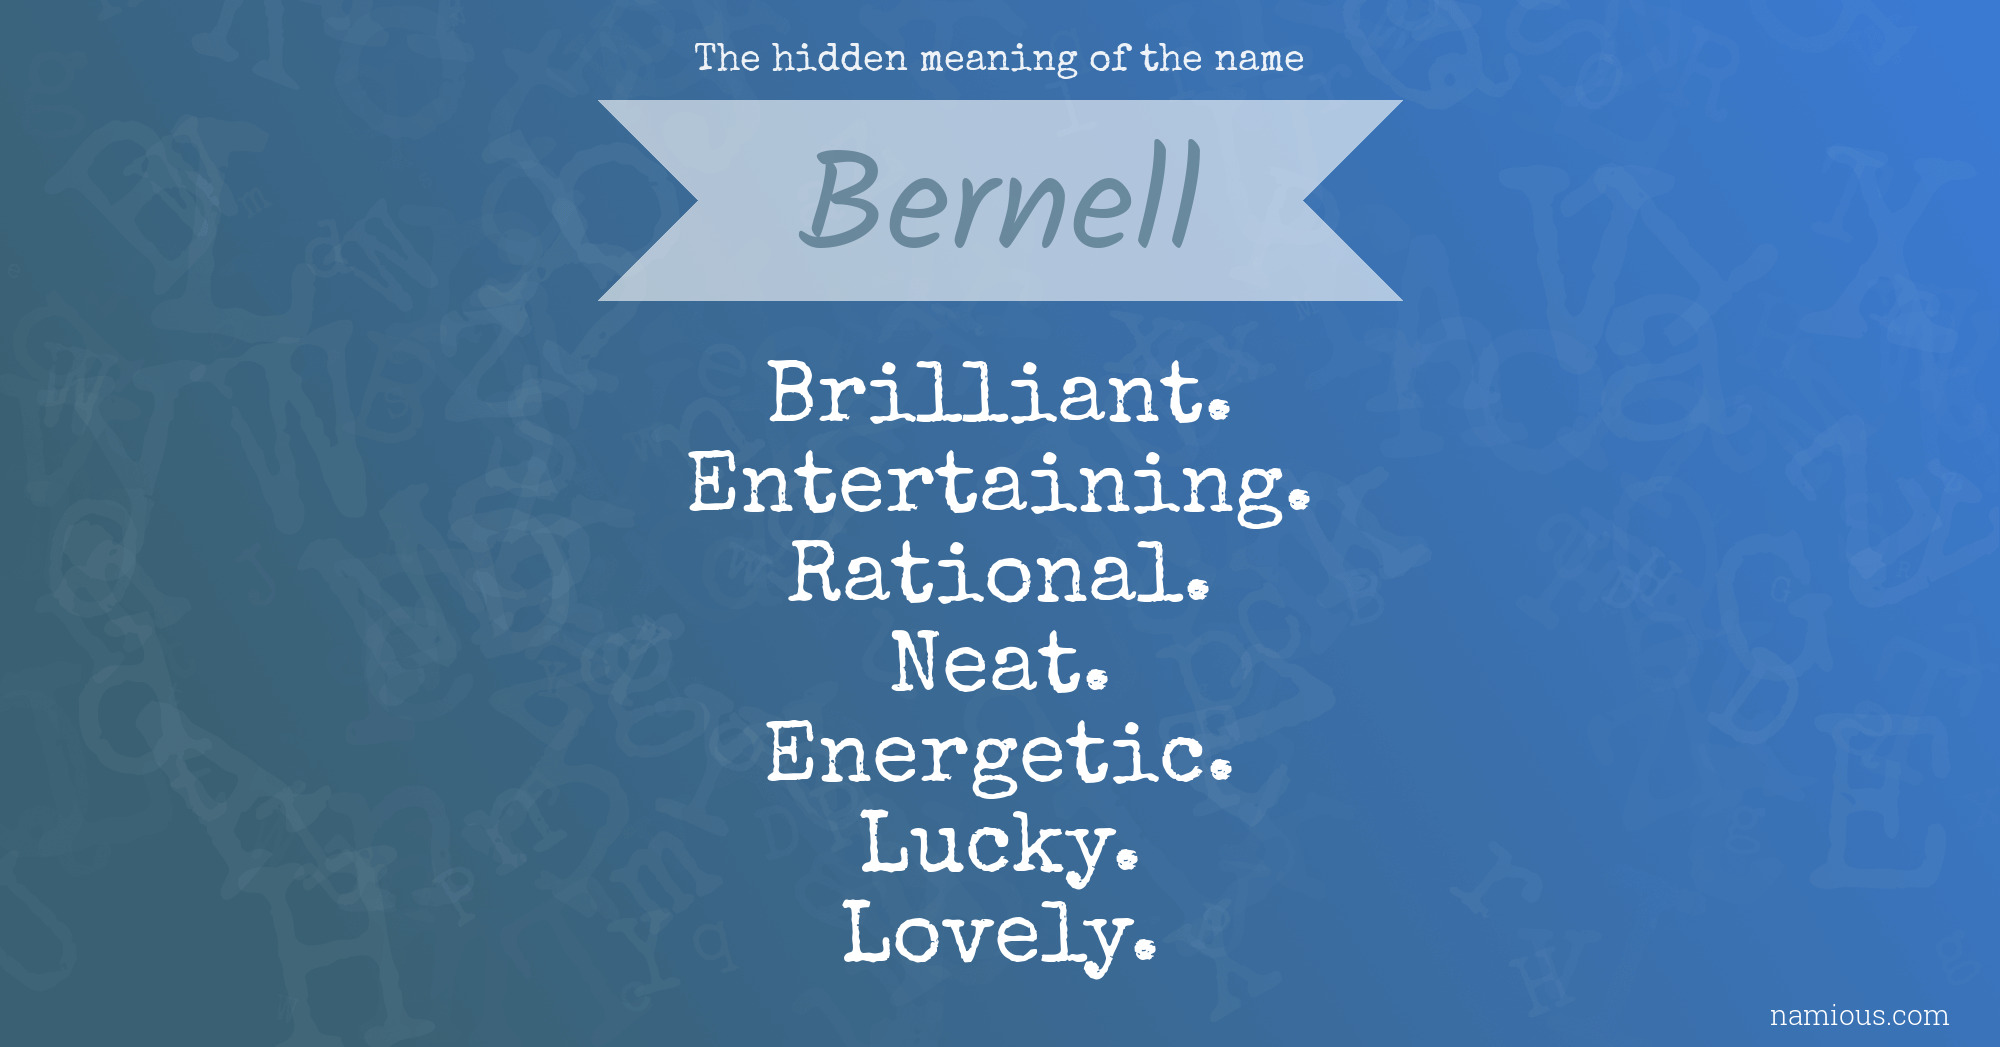 The hidden meaning of the name Bernell